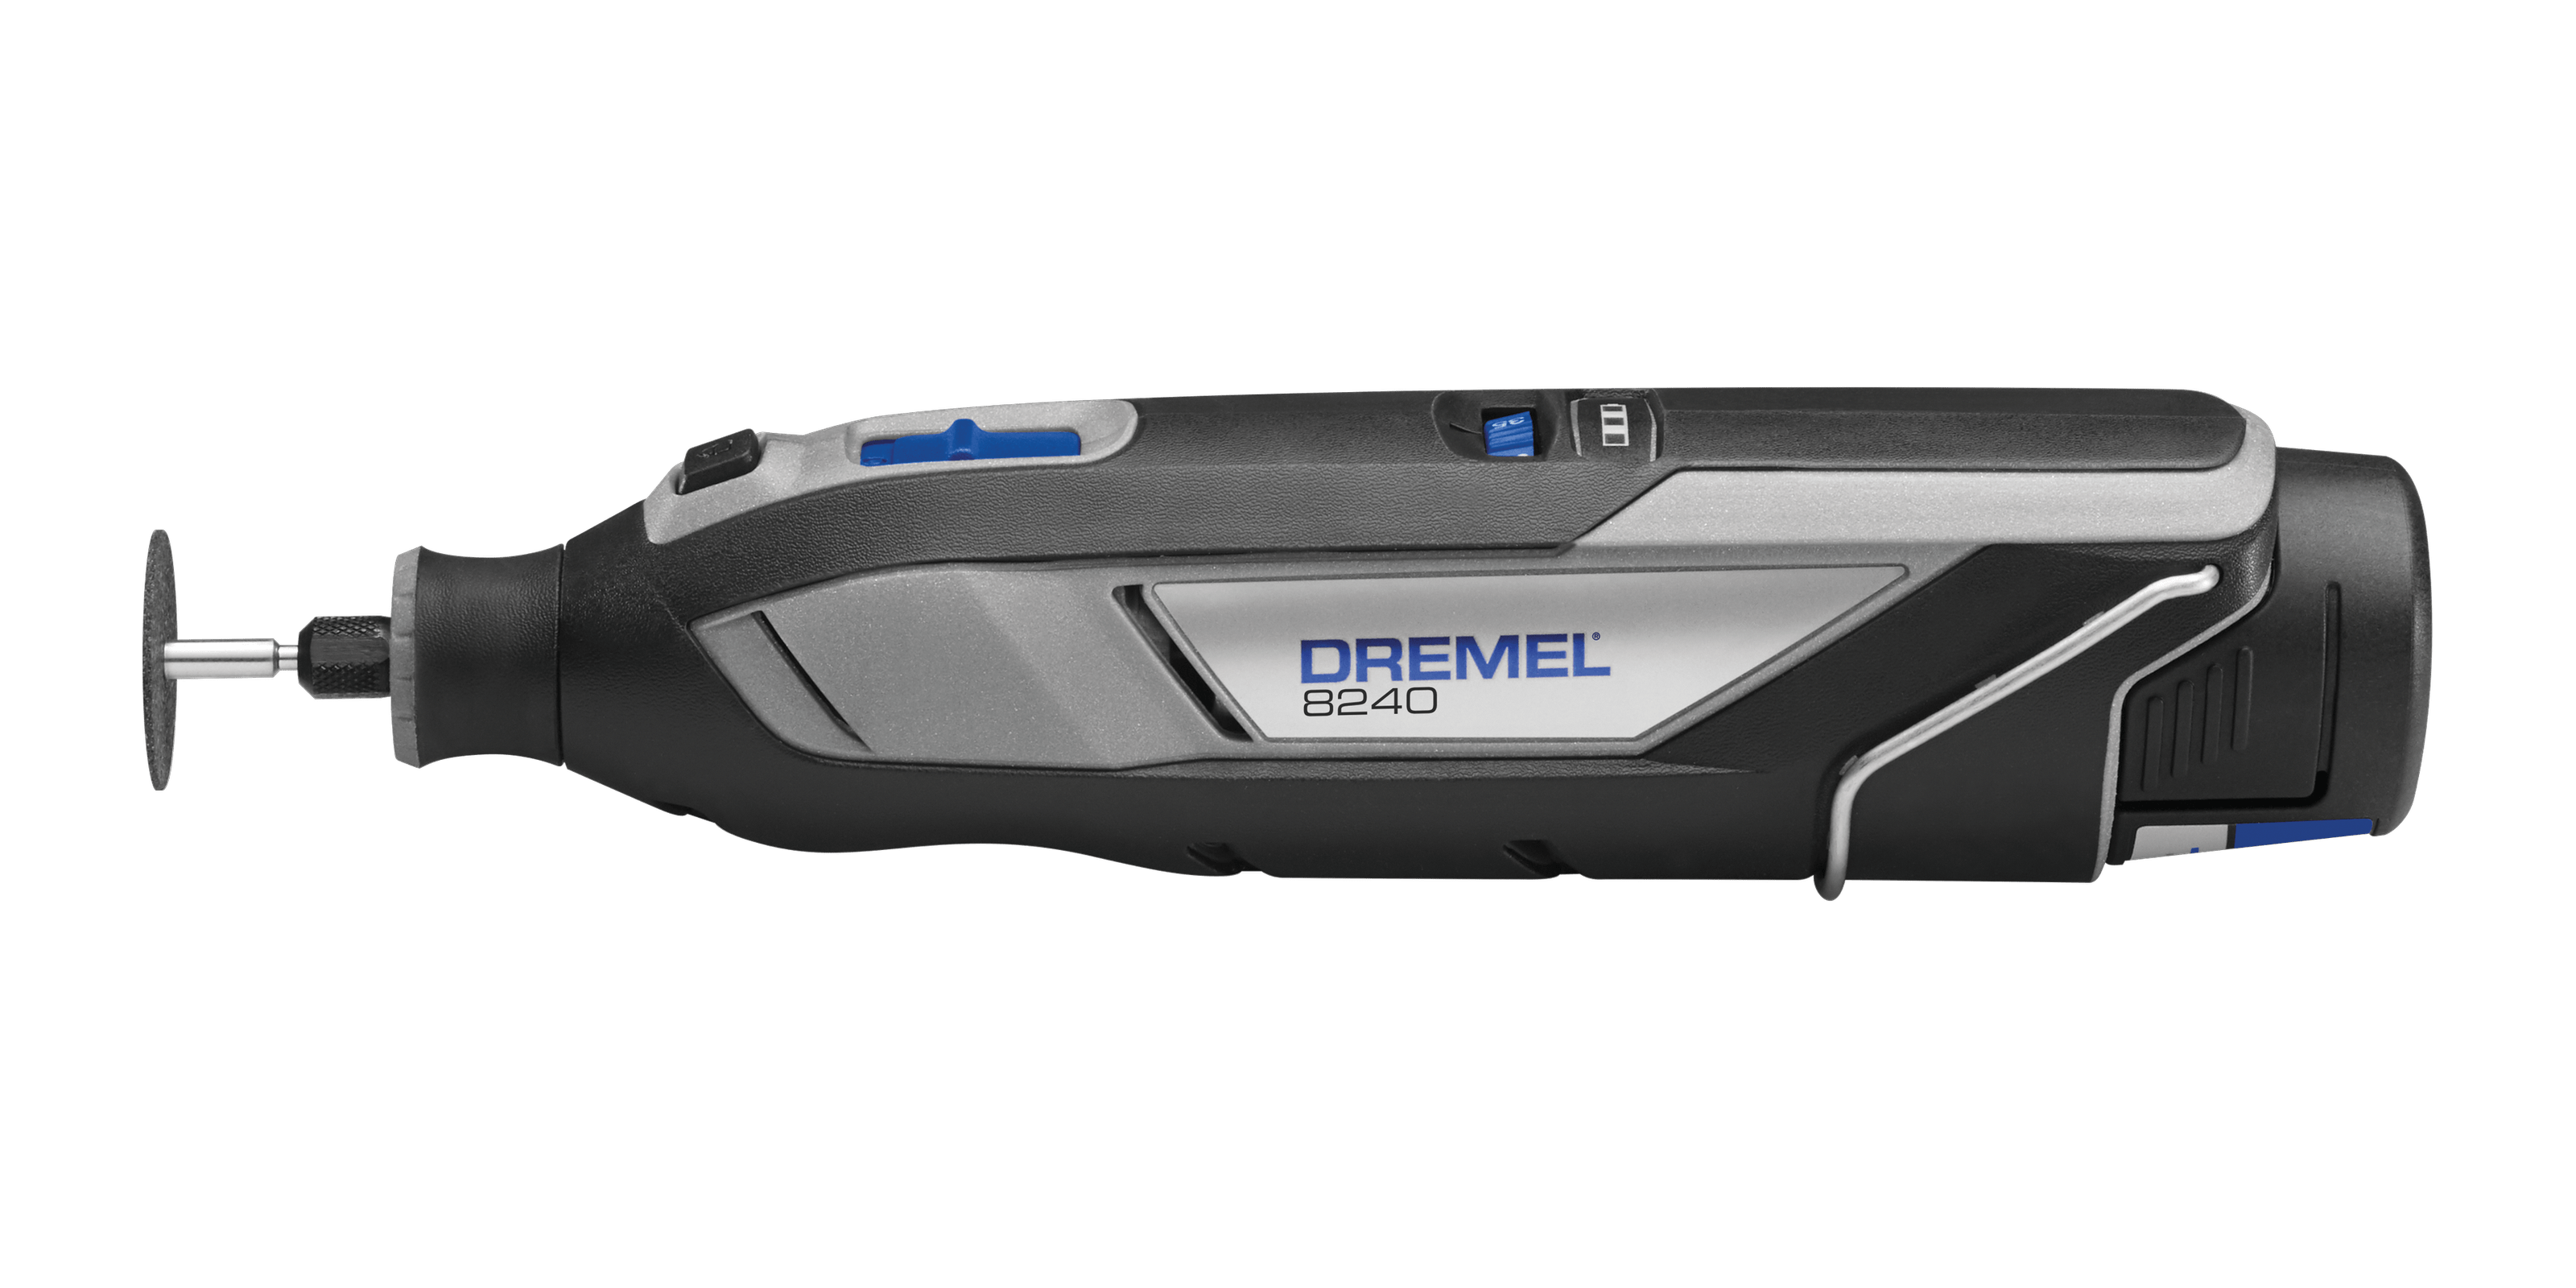 Get Started With The Dremel Lite (7760)